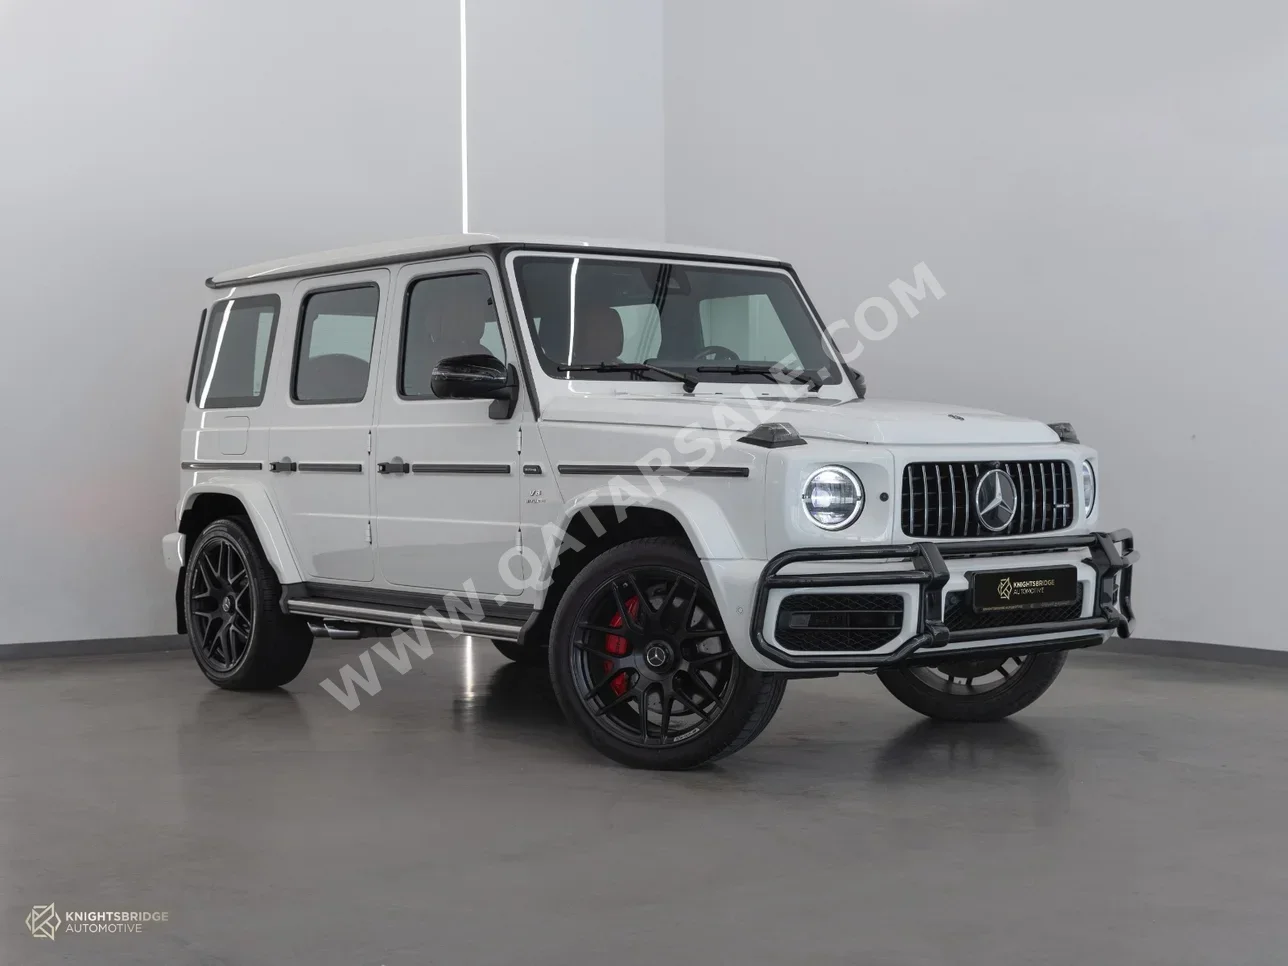 Mercedes-Benz  G-Class  63 AMG  2019  Automatic  70,400 Km  8 Cylinder  Four Wheel Drive (4WD)  SUV  White  With Warranty